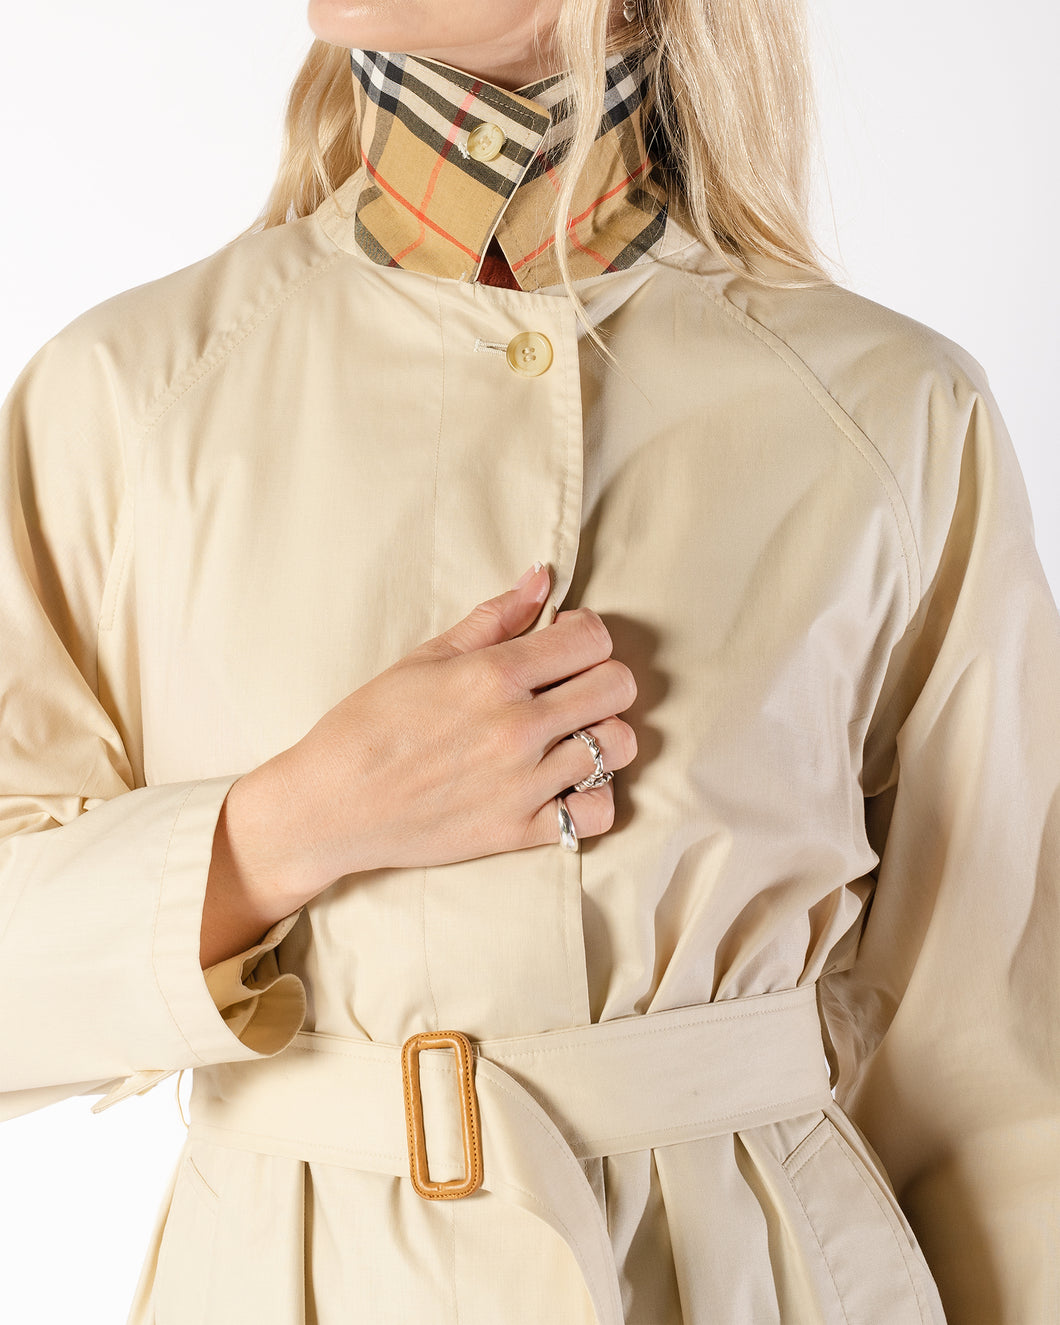 80s Burberrys' Lightweight Beige Cotton Belted Trench